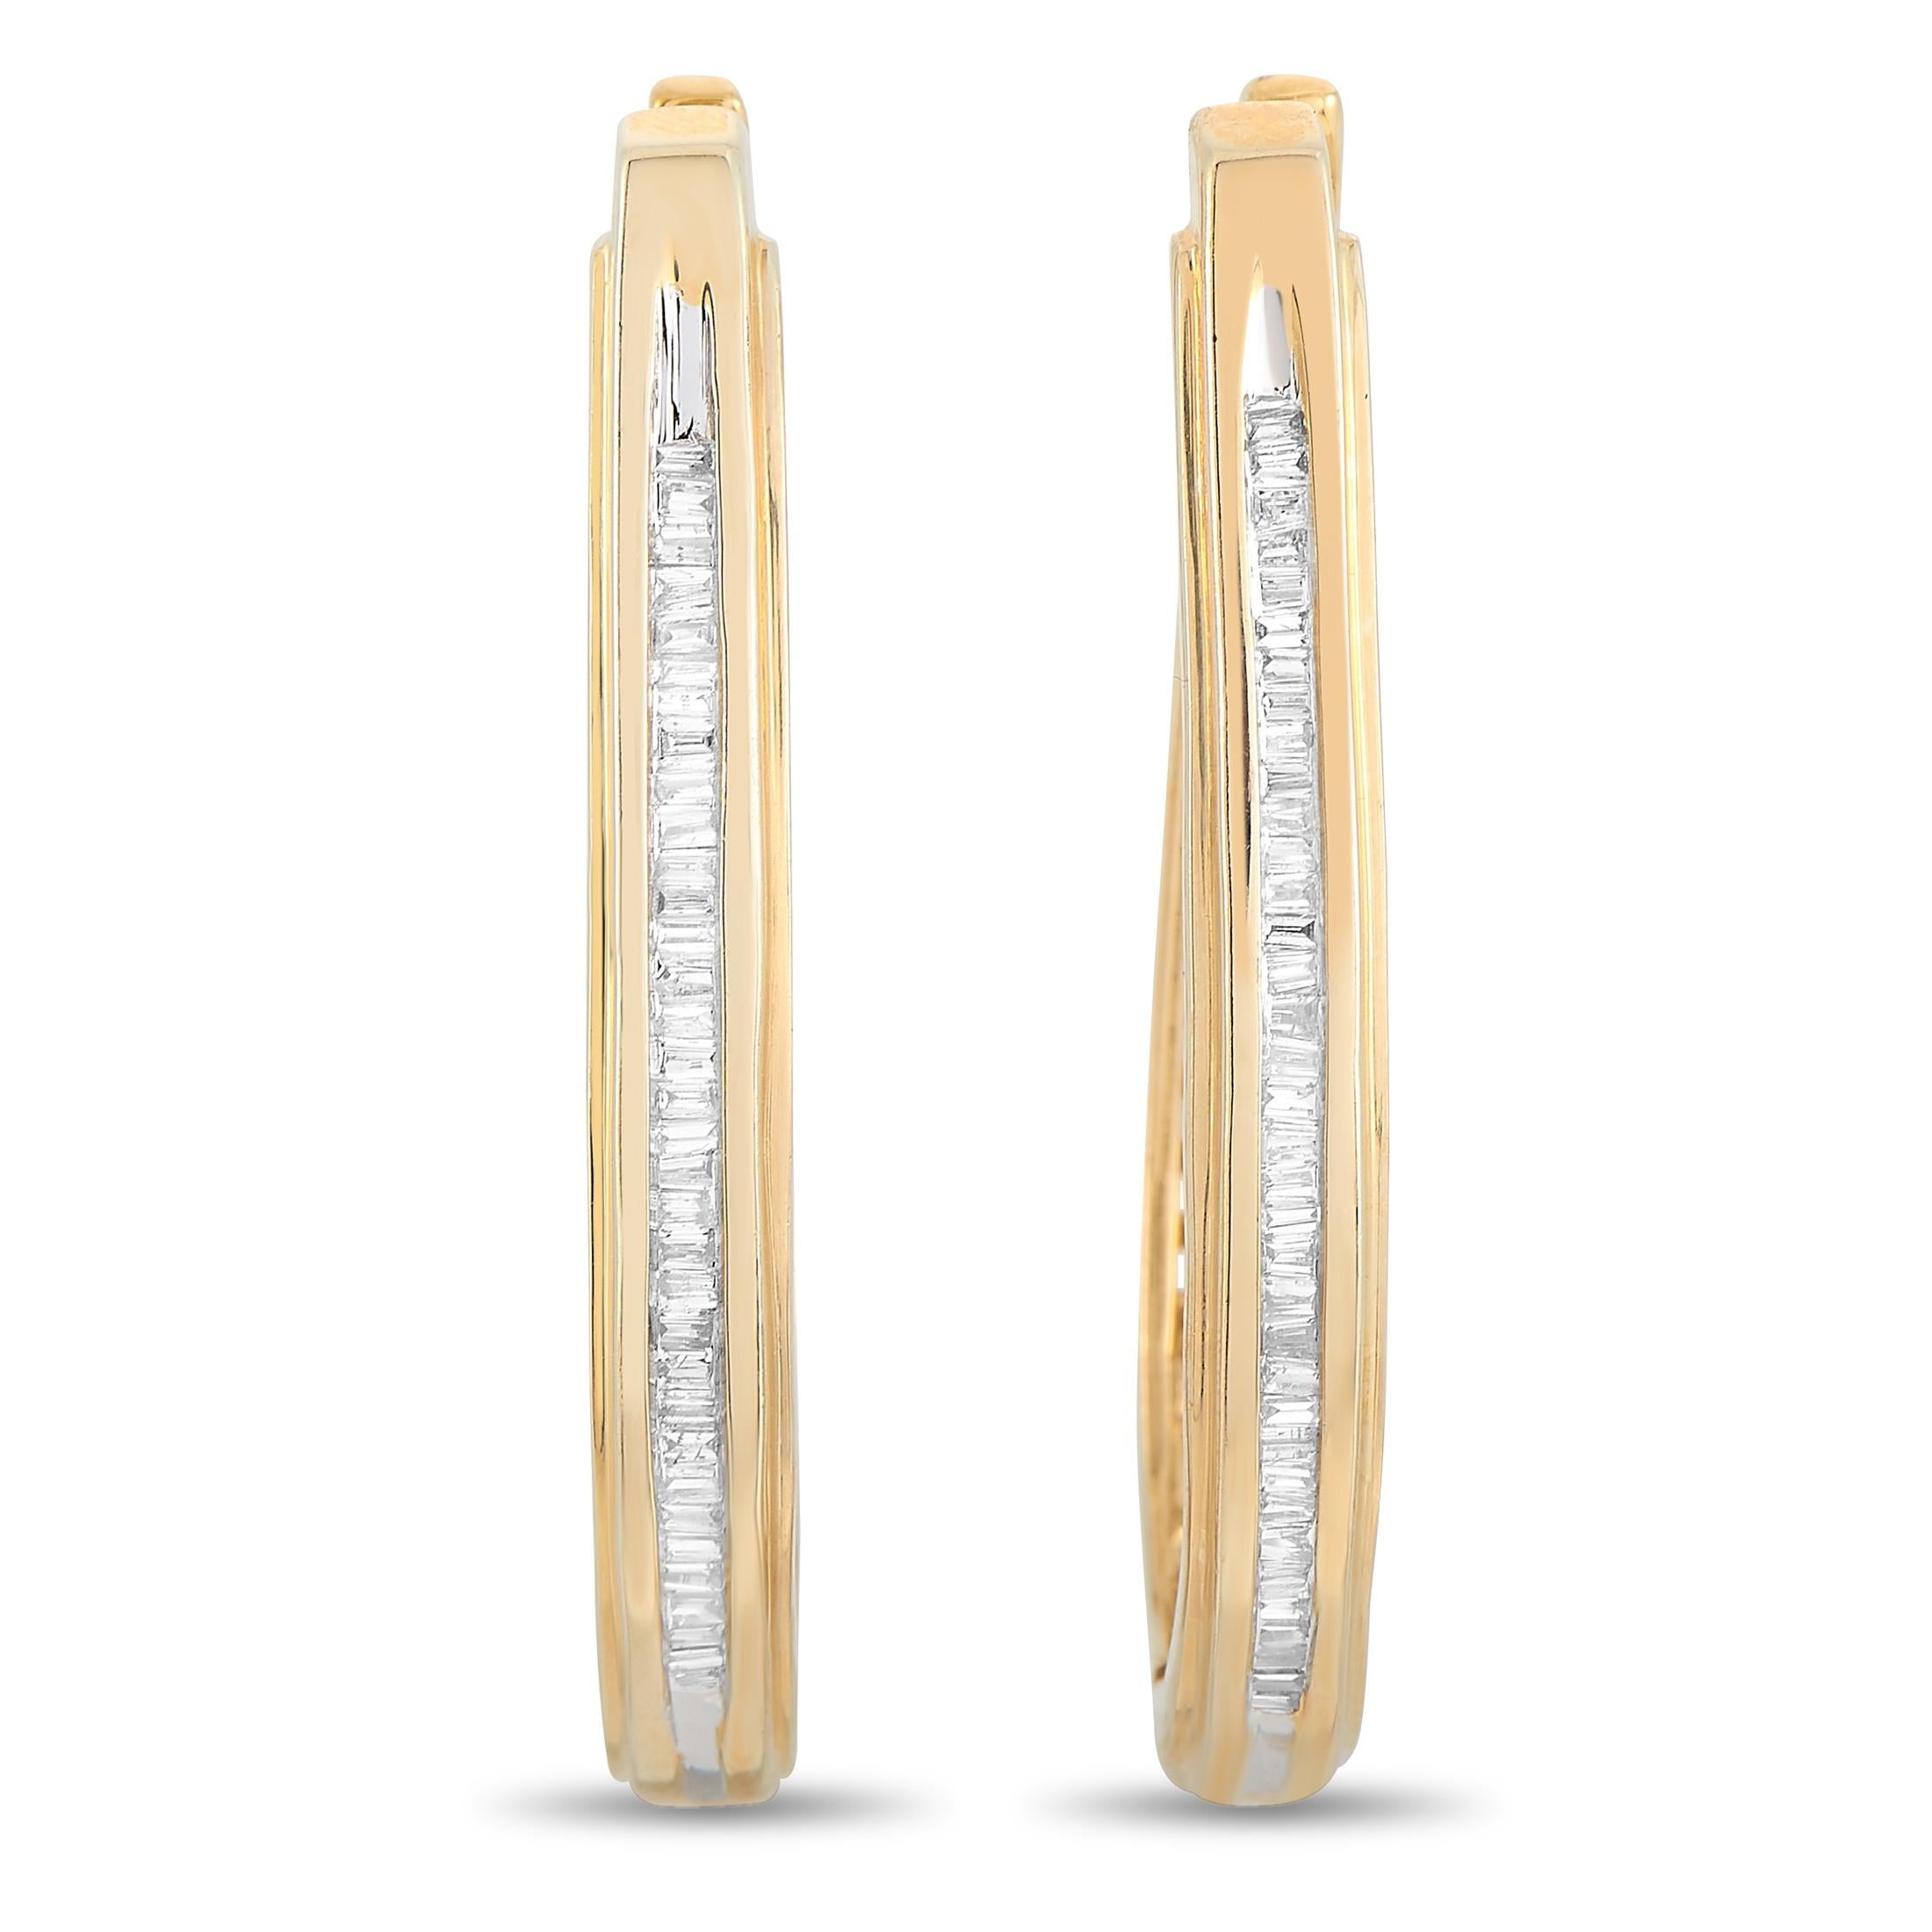 Dress up your work suit or casual wear with this LB Exclusive piece. The classic and chic yellow gold hoop earrings have been made more stylish with the addition of a line of round diamonds. Crafted in 14k yellow gold and lined with a band of